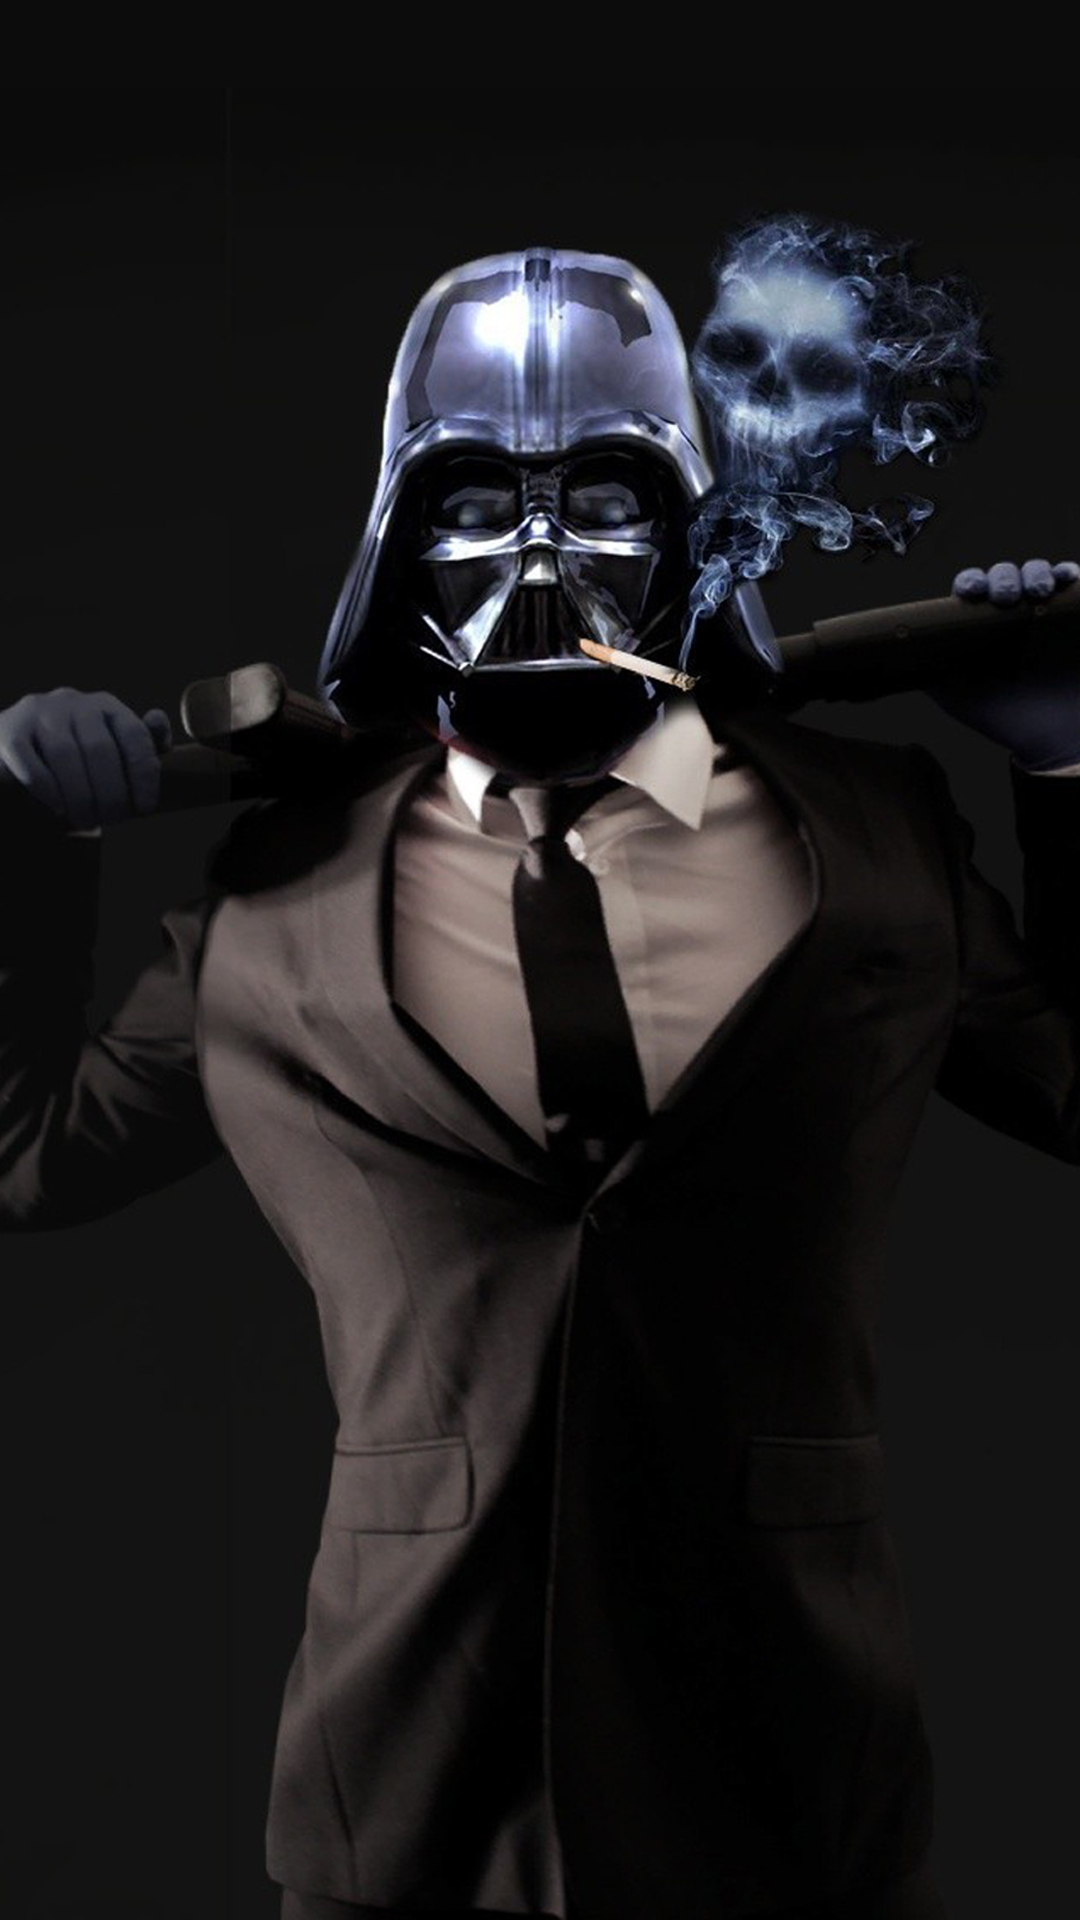 Badass Wallpapers For Android 01 0f 40 with Darth Vader ...